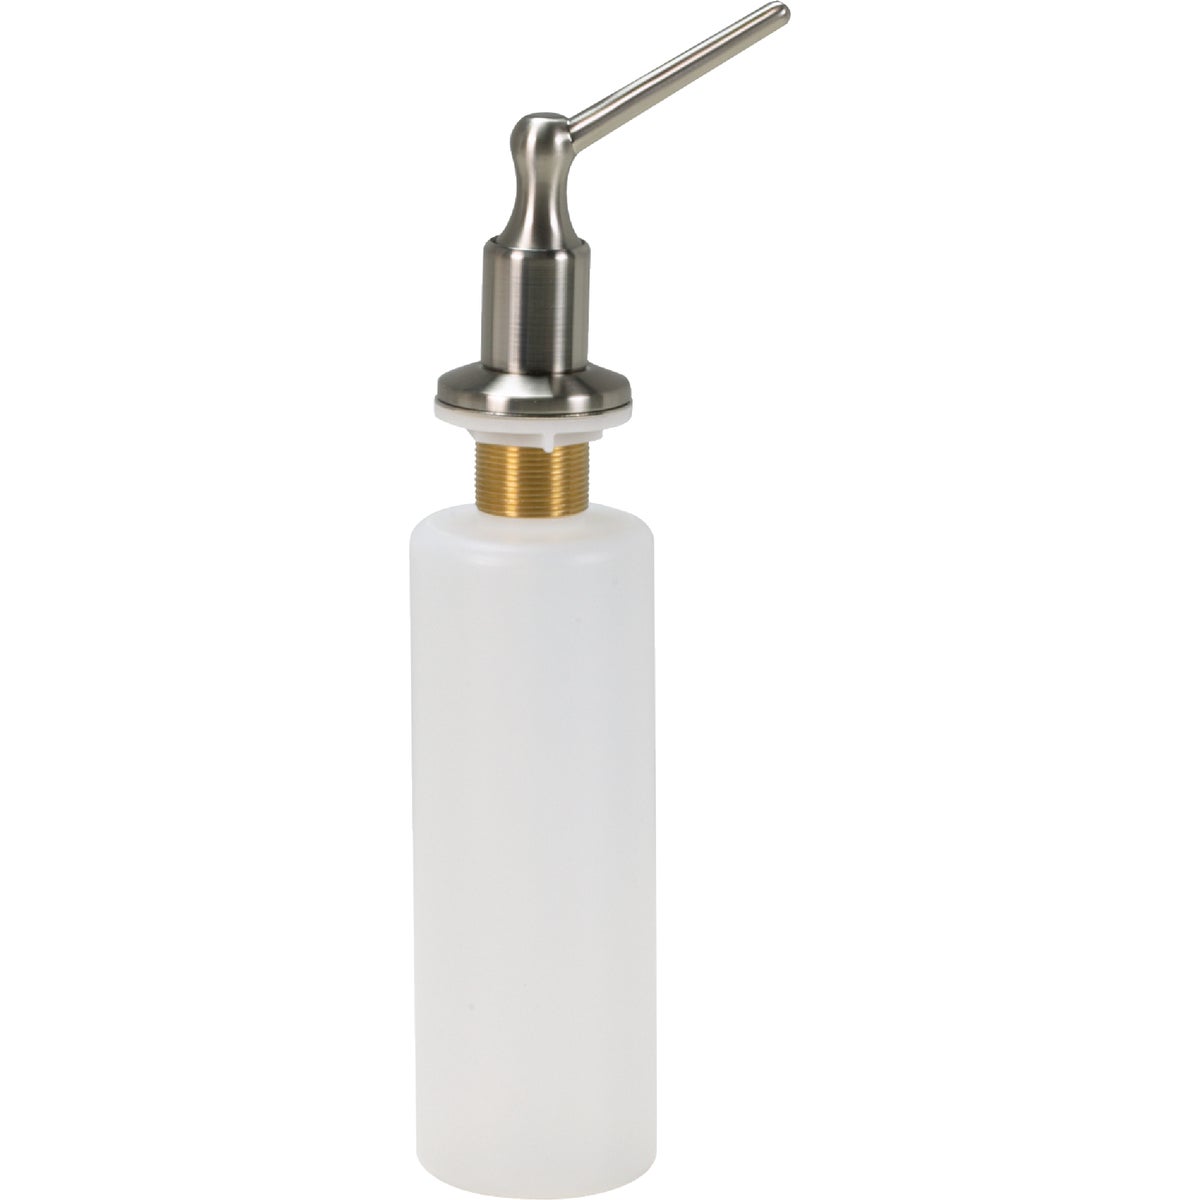 Home Impressions Lotion/Soap Dispenser in Brushed Nickel